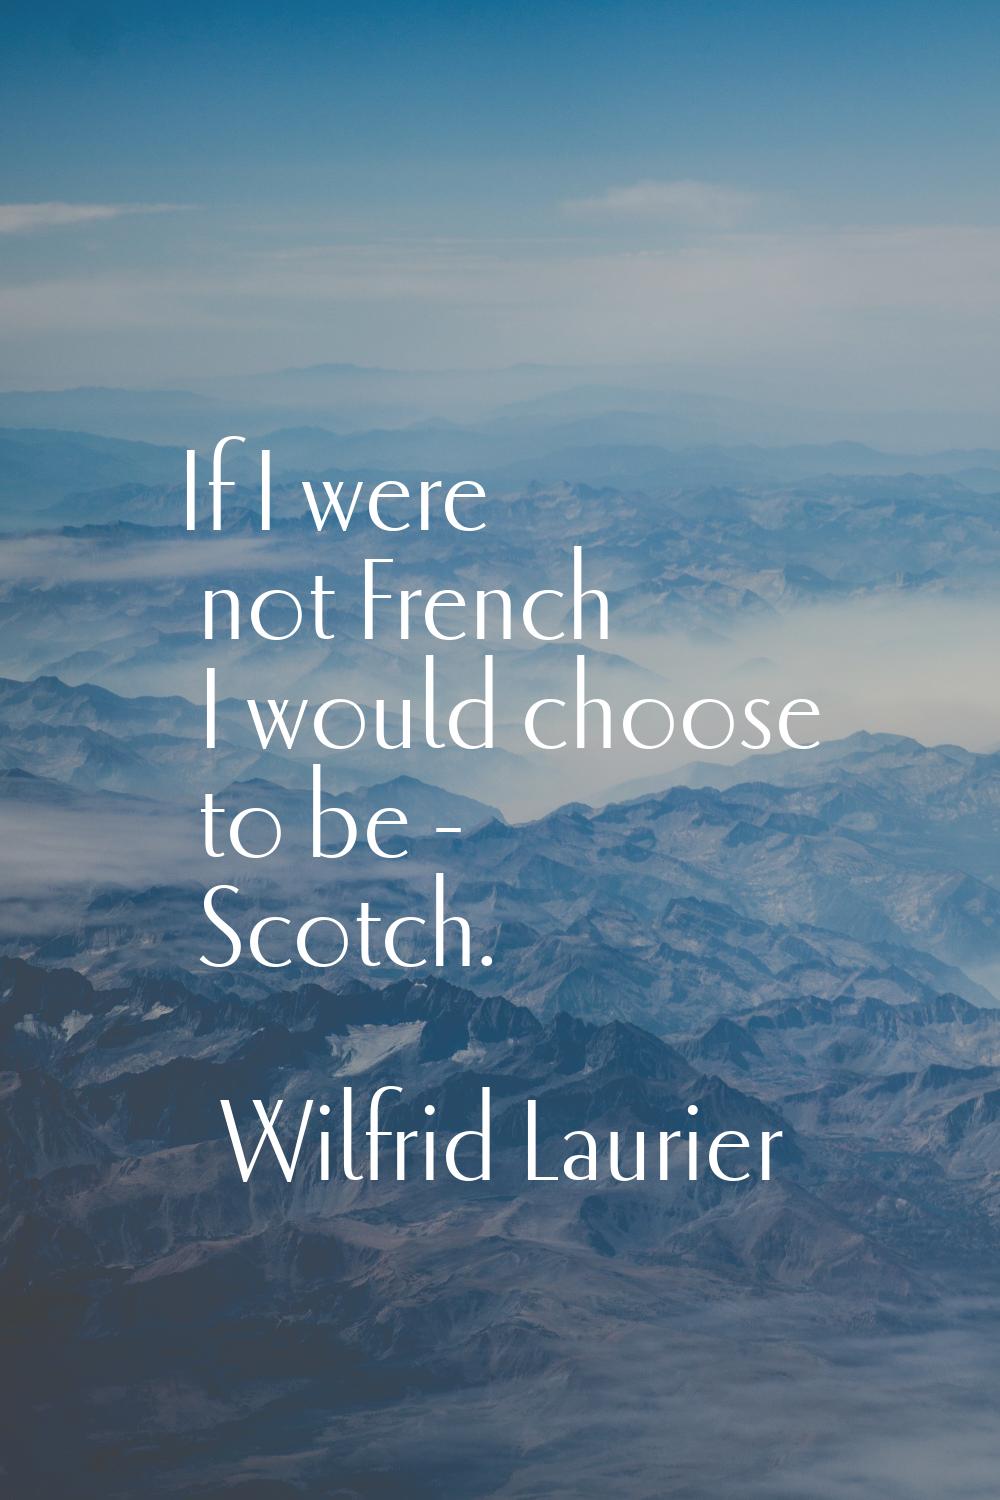 If I were not French I would choose to be - Scotch.